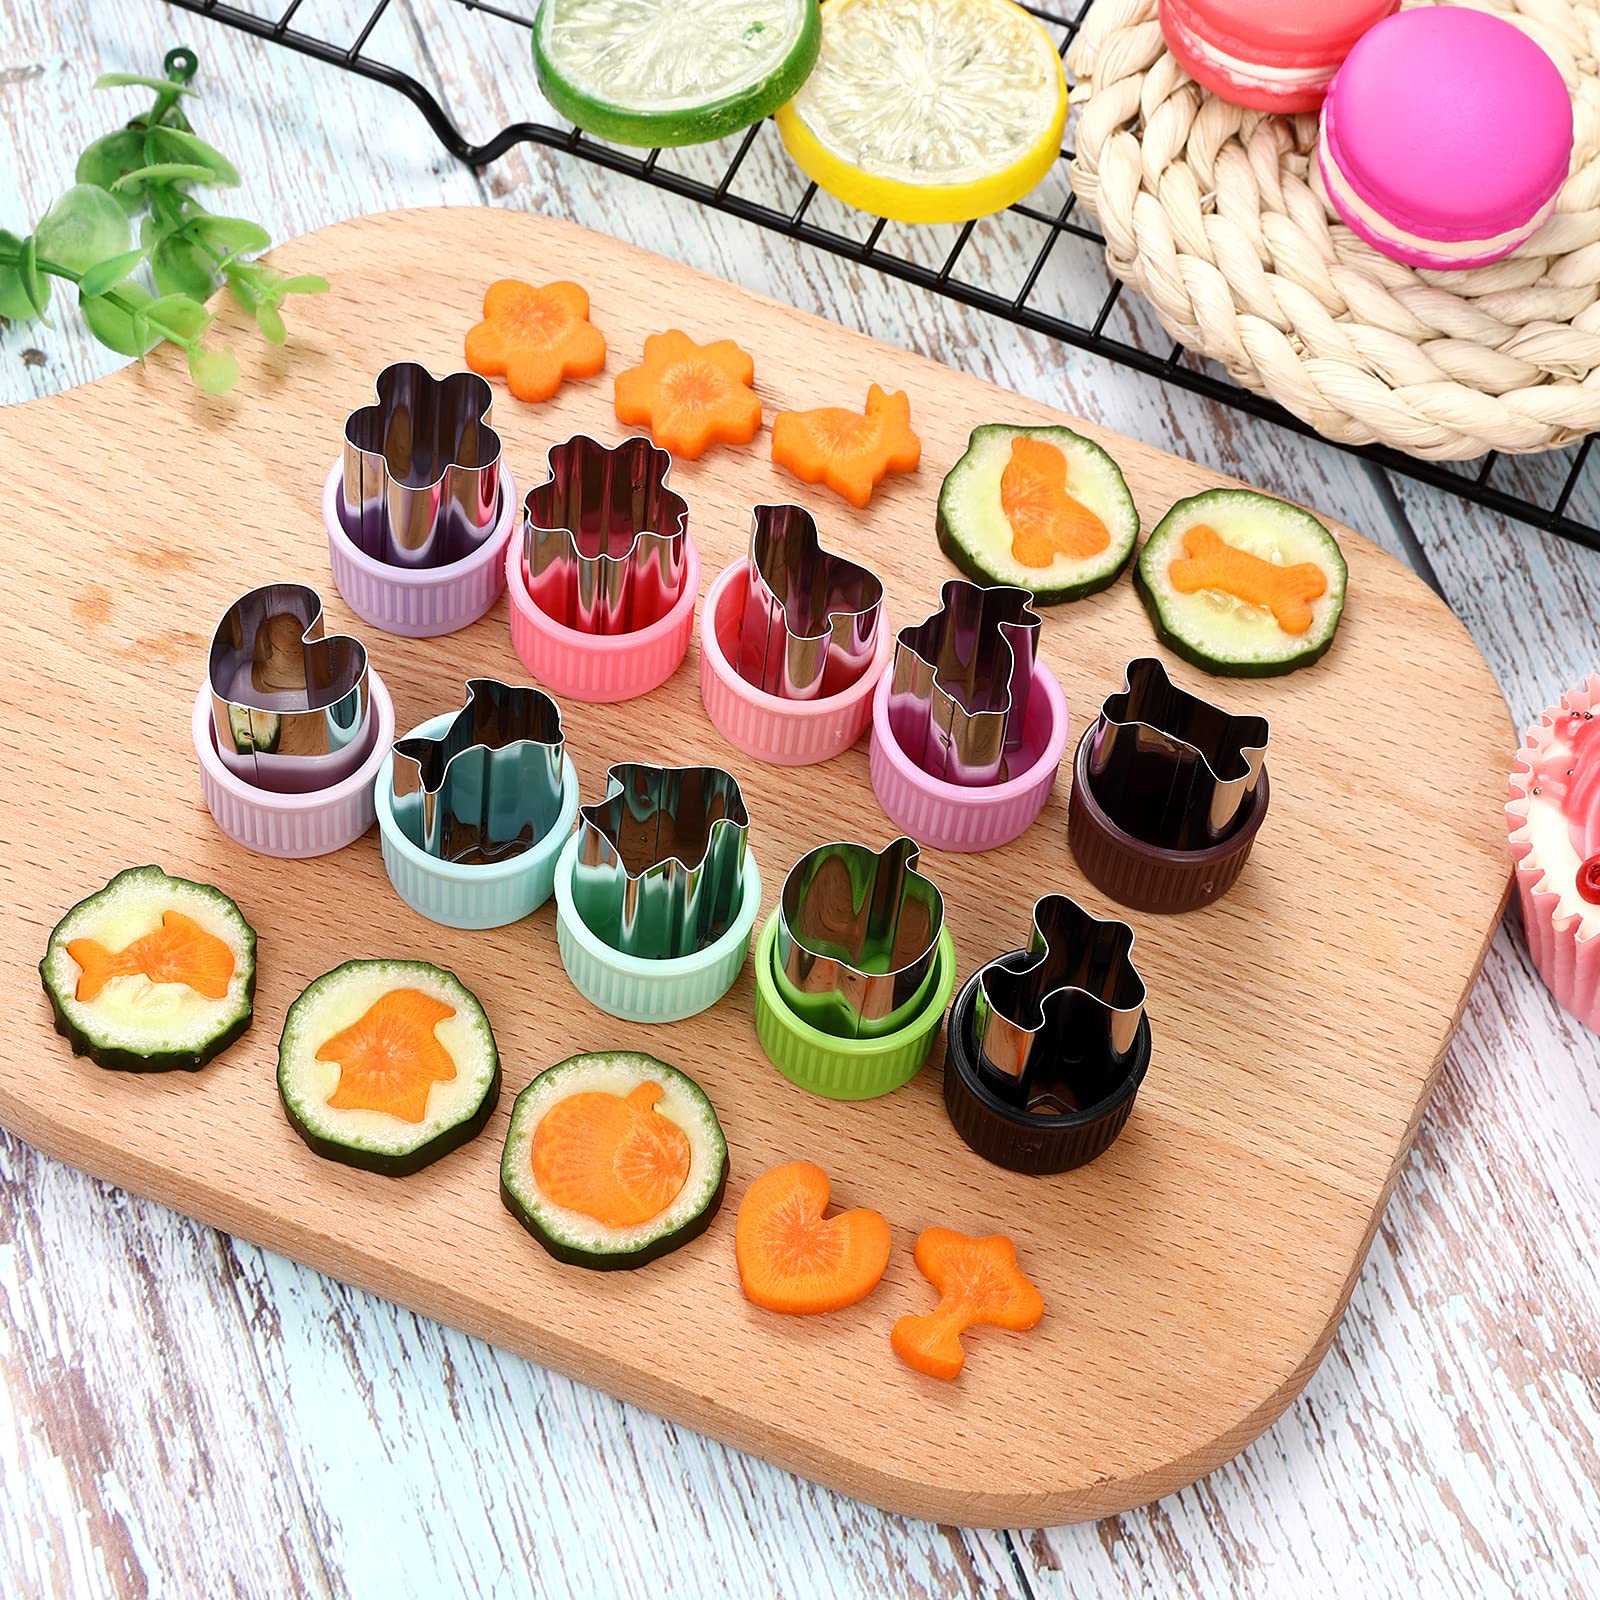 MUYIYAMEI Vegetable Cutter Shape Set, Mini Cookie Cutters,Biscuit Cutter to Decorate Food, Children's Baking and Food Supplement tool Accessories Kitchen Crafts, (20PCS+20Fork)